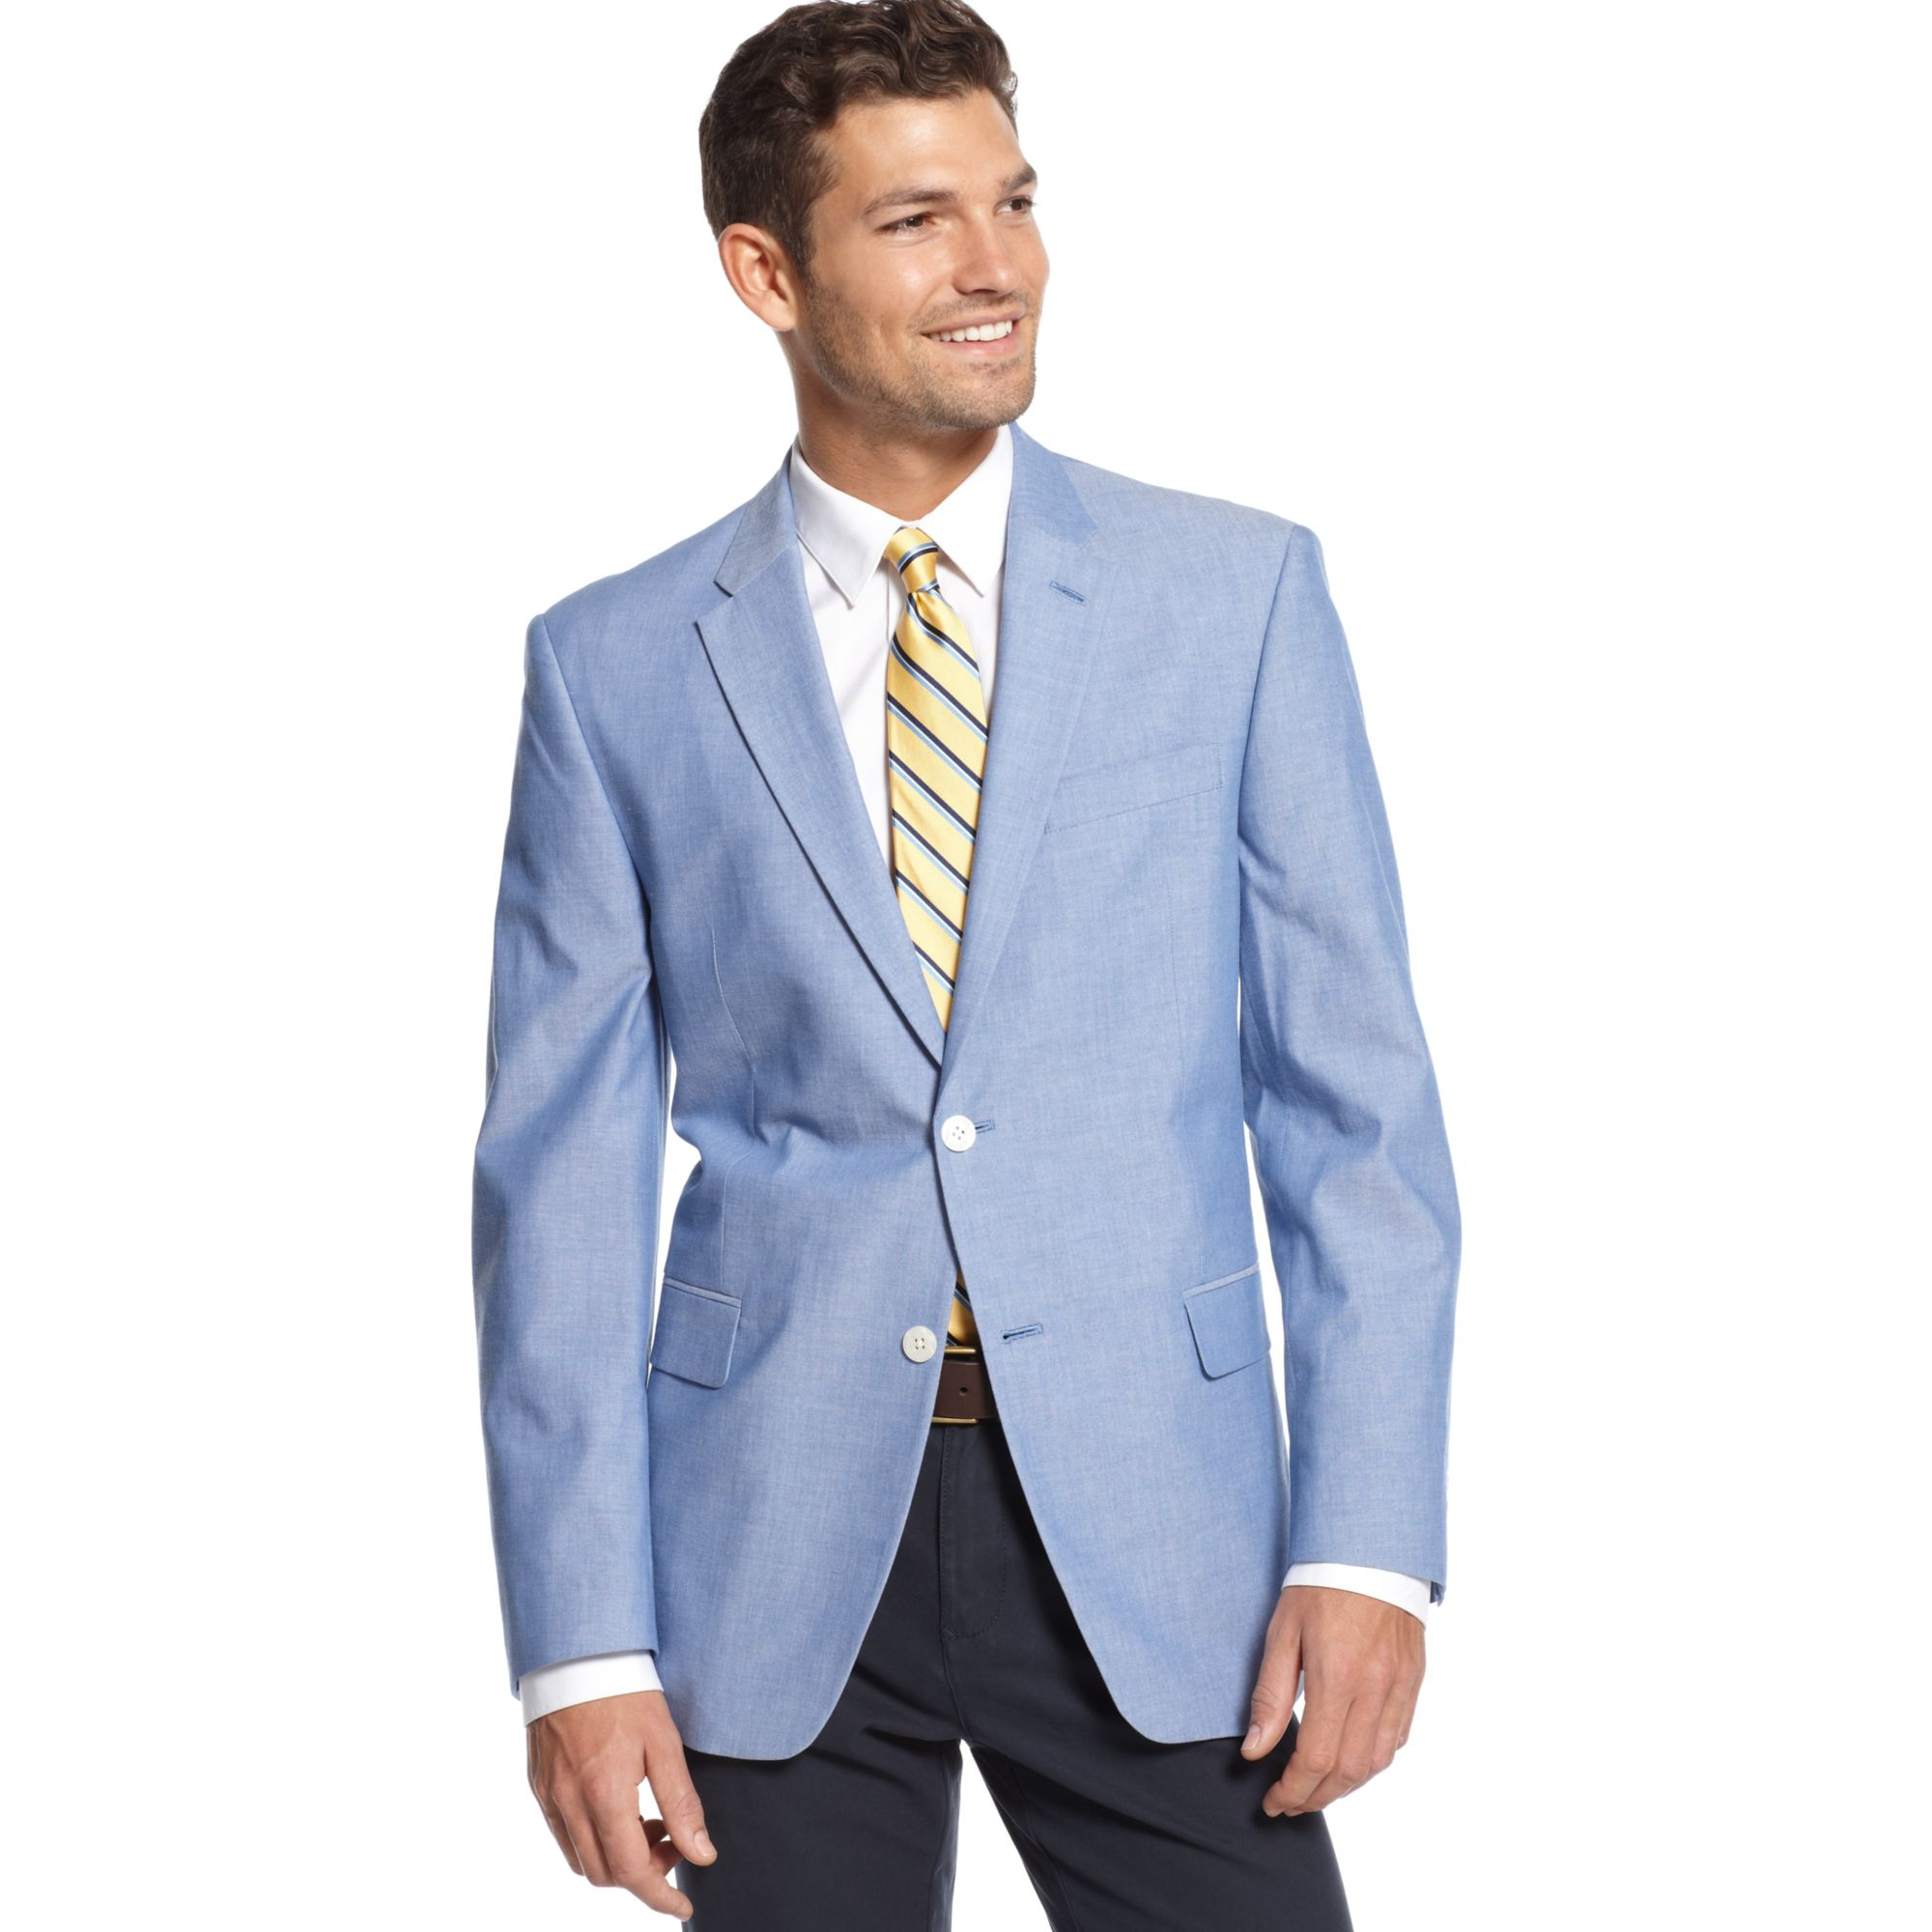 Tommy Hilfiger Chambray Blazer Trim Fit in Blue for Men - Lyst